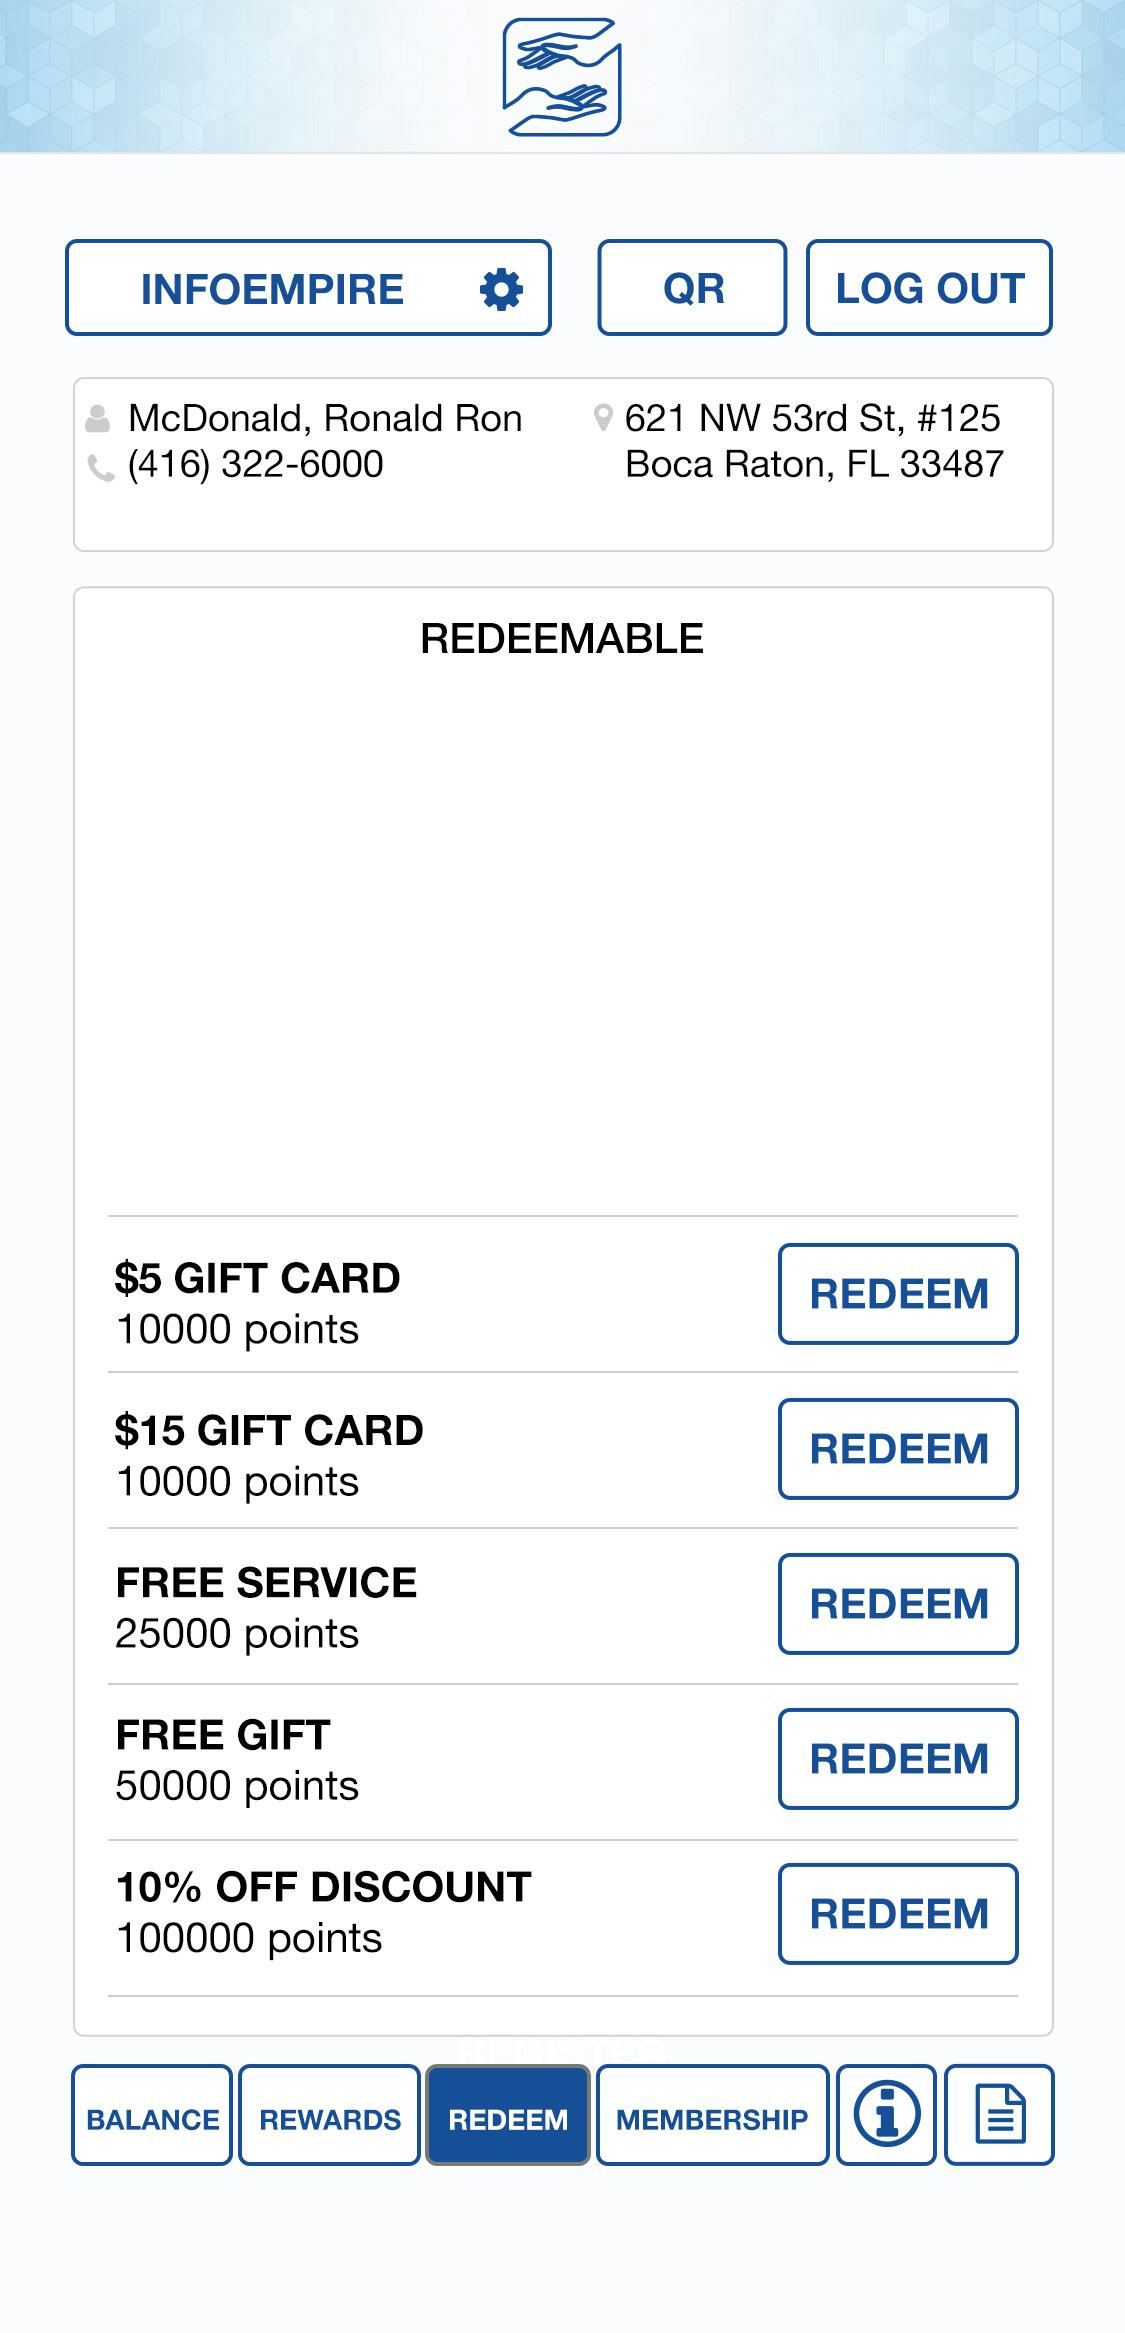 Referral and Rewards Software - In this section, you can convert your client’s points to gift cards or any other rewards you create. Select the reward they choose and press the “Redeem” button. If there aren’t enough points, the points button will be inactive.